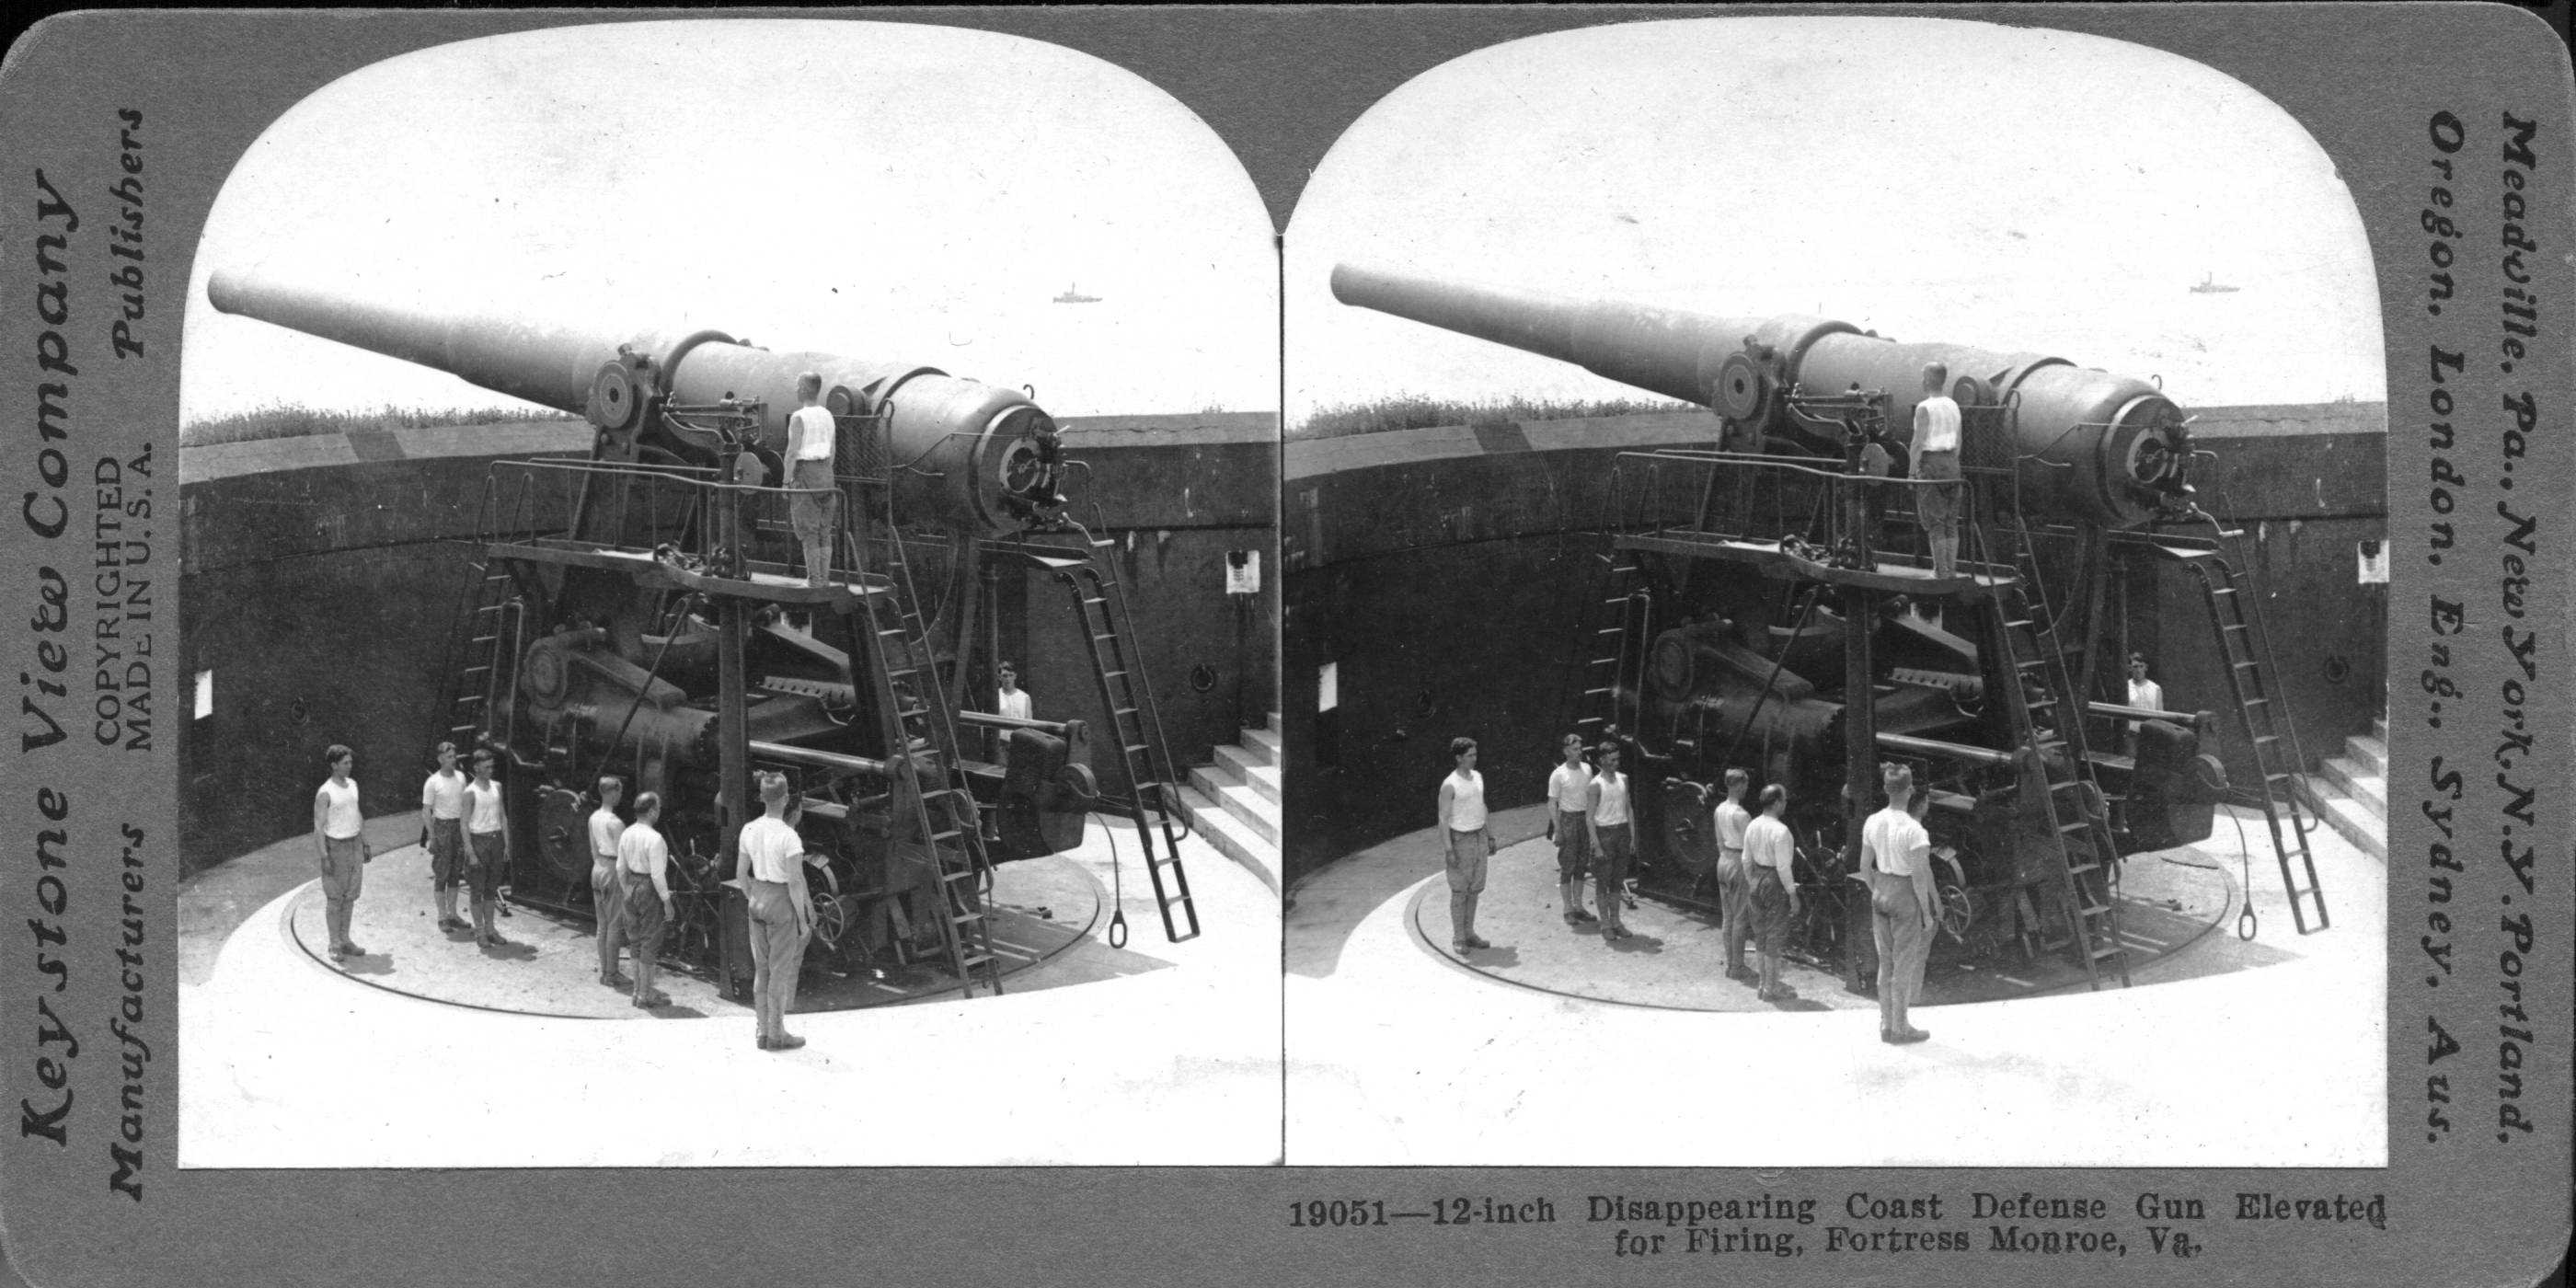 12-inch Disappearing Coast Defense Gun Elevated for Firing, Fortress Monroe, Va.